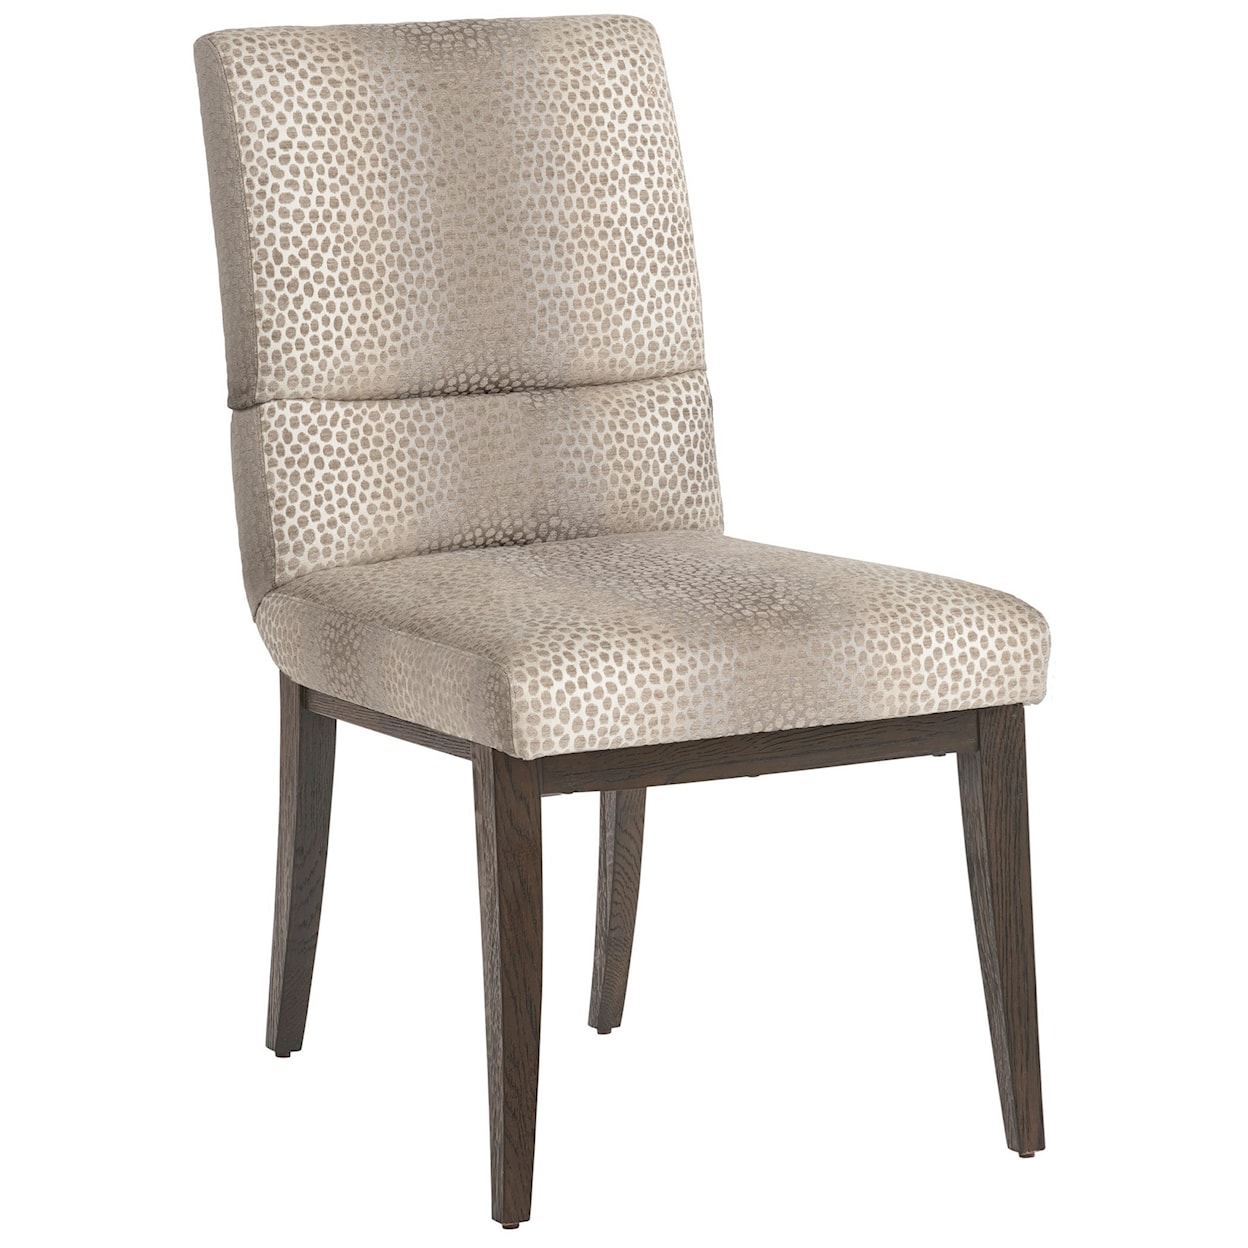 Barclay Butera Park City Glenwild Customizable Upholstered Side Chair